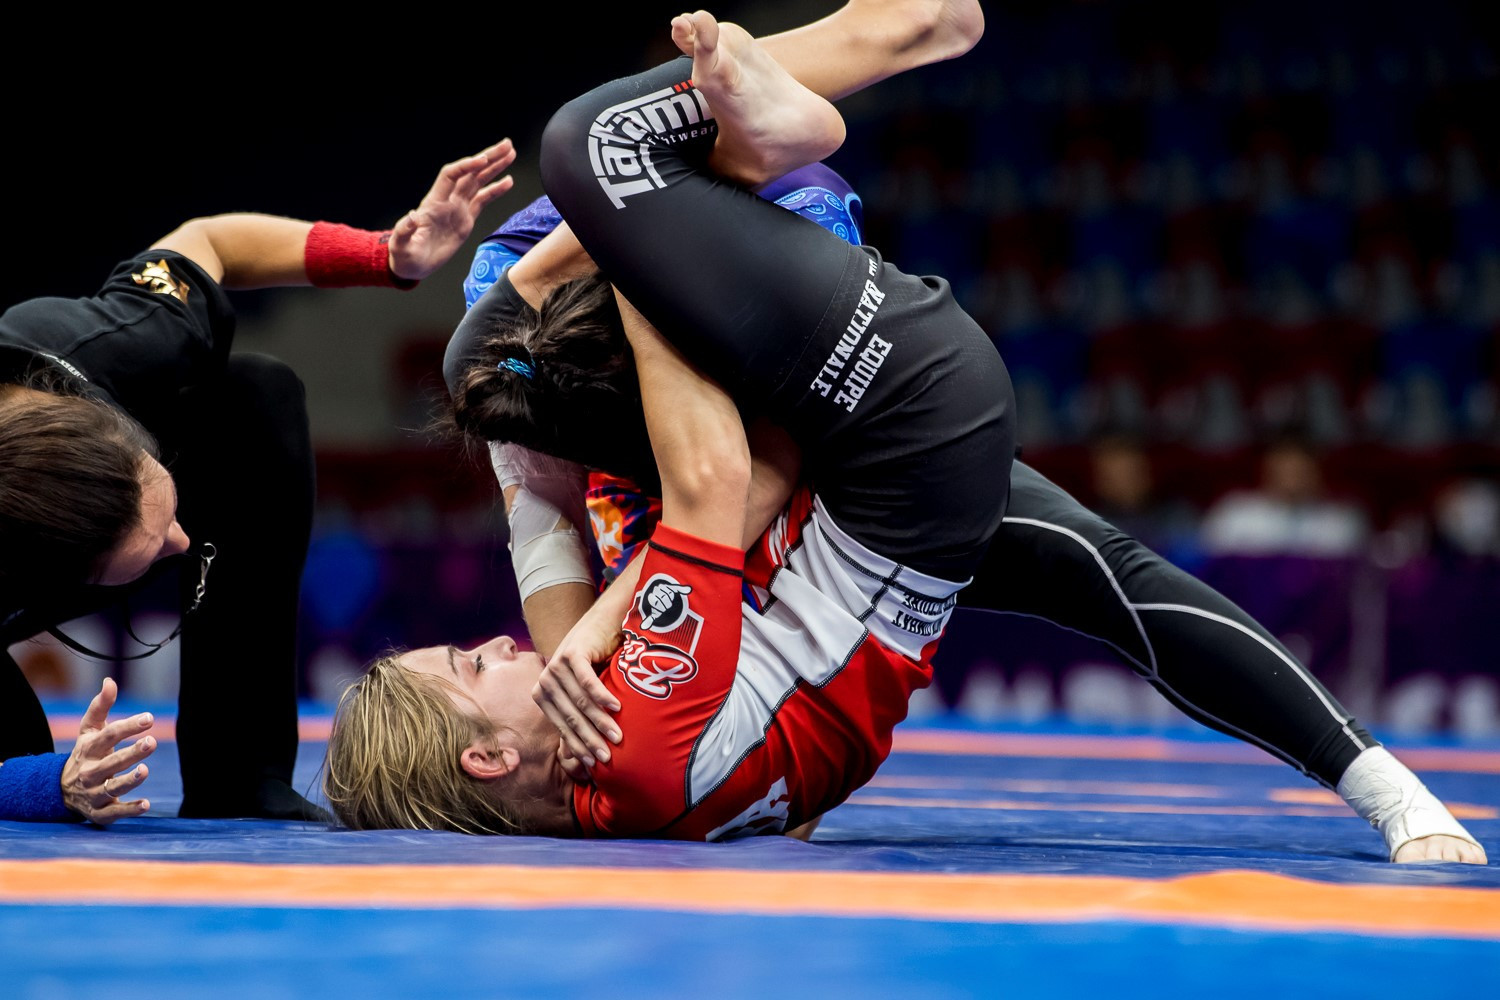 UWW signs partnership deal with FloGrappling to live stream World Grappling Championships